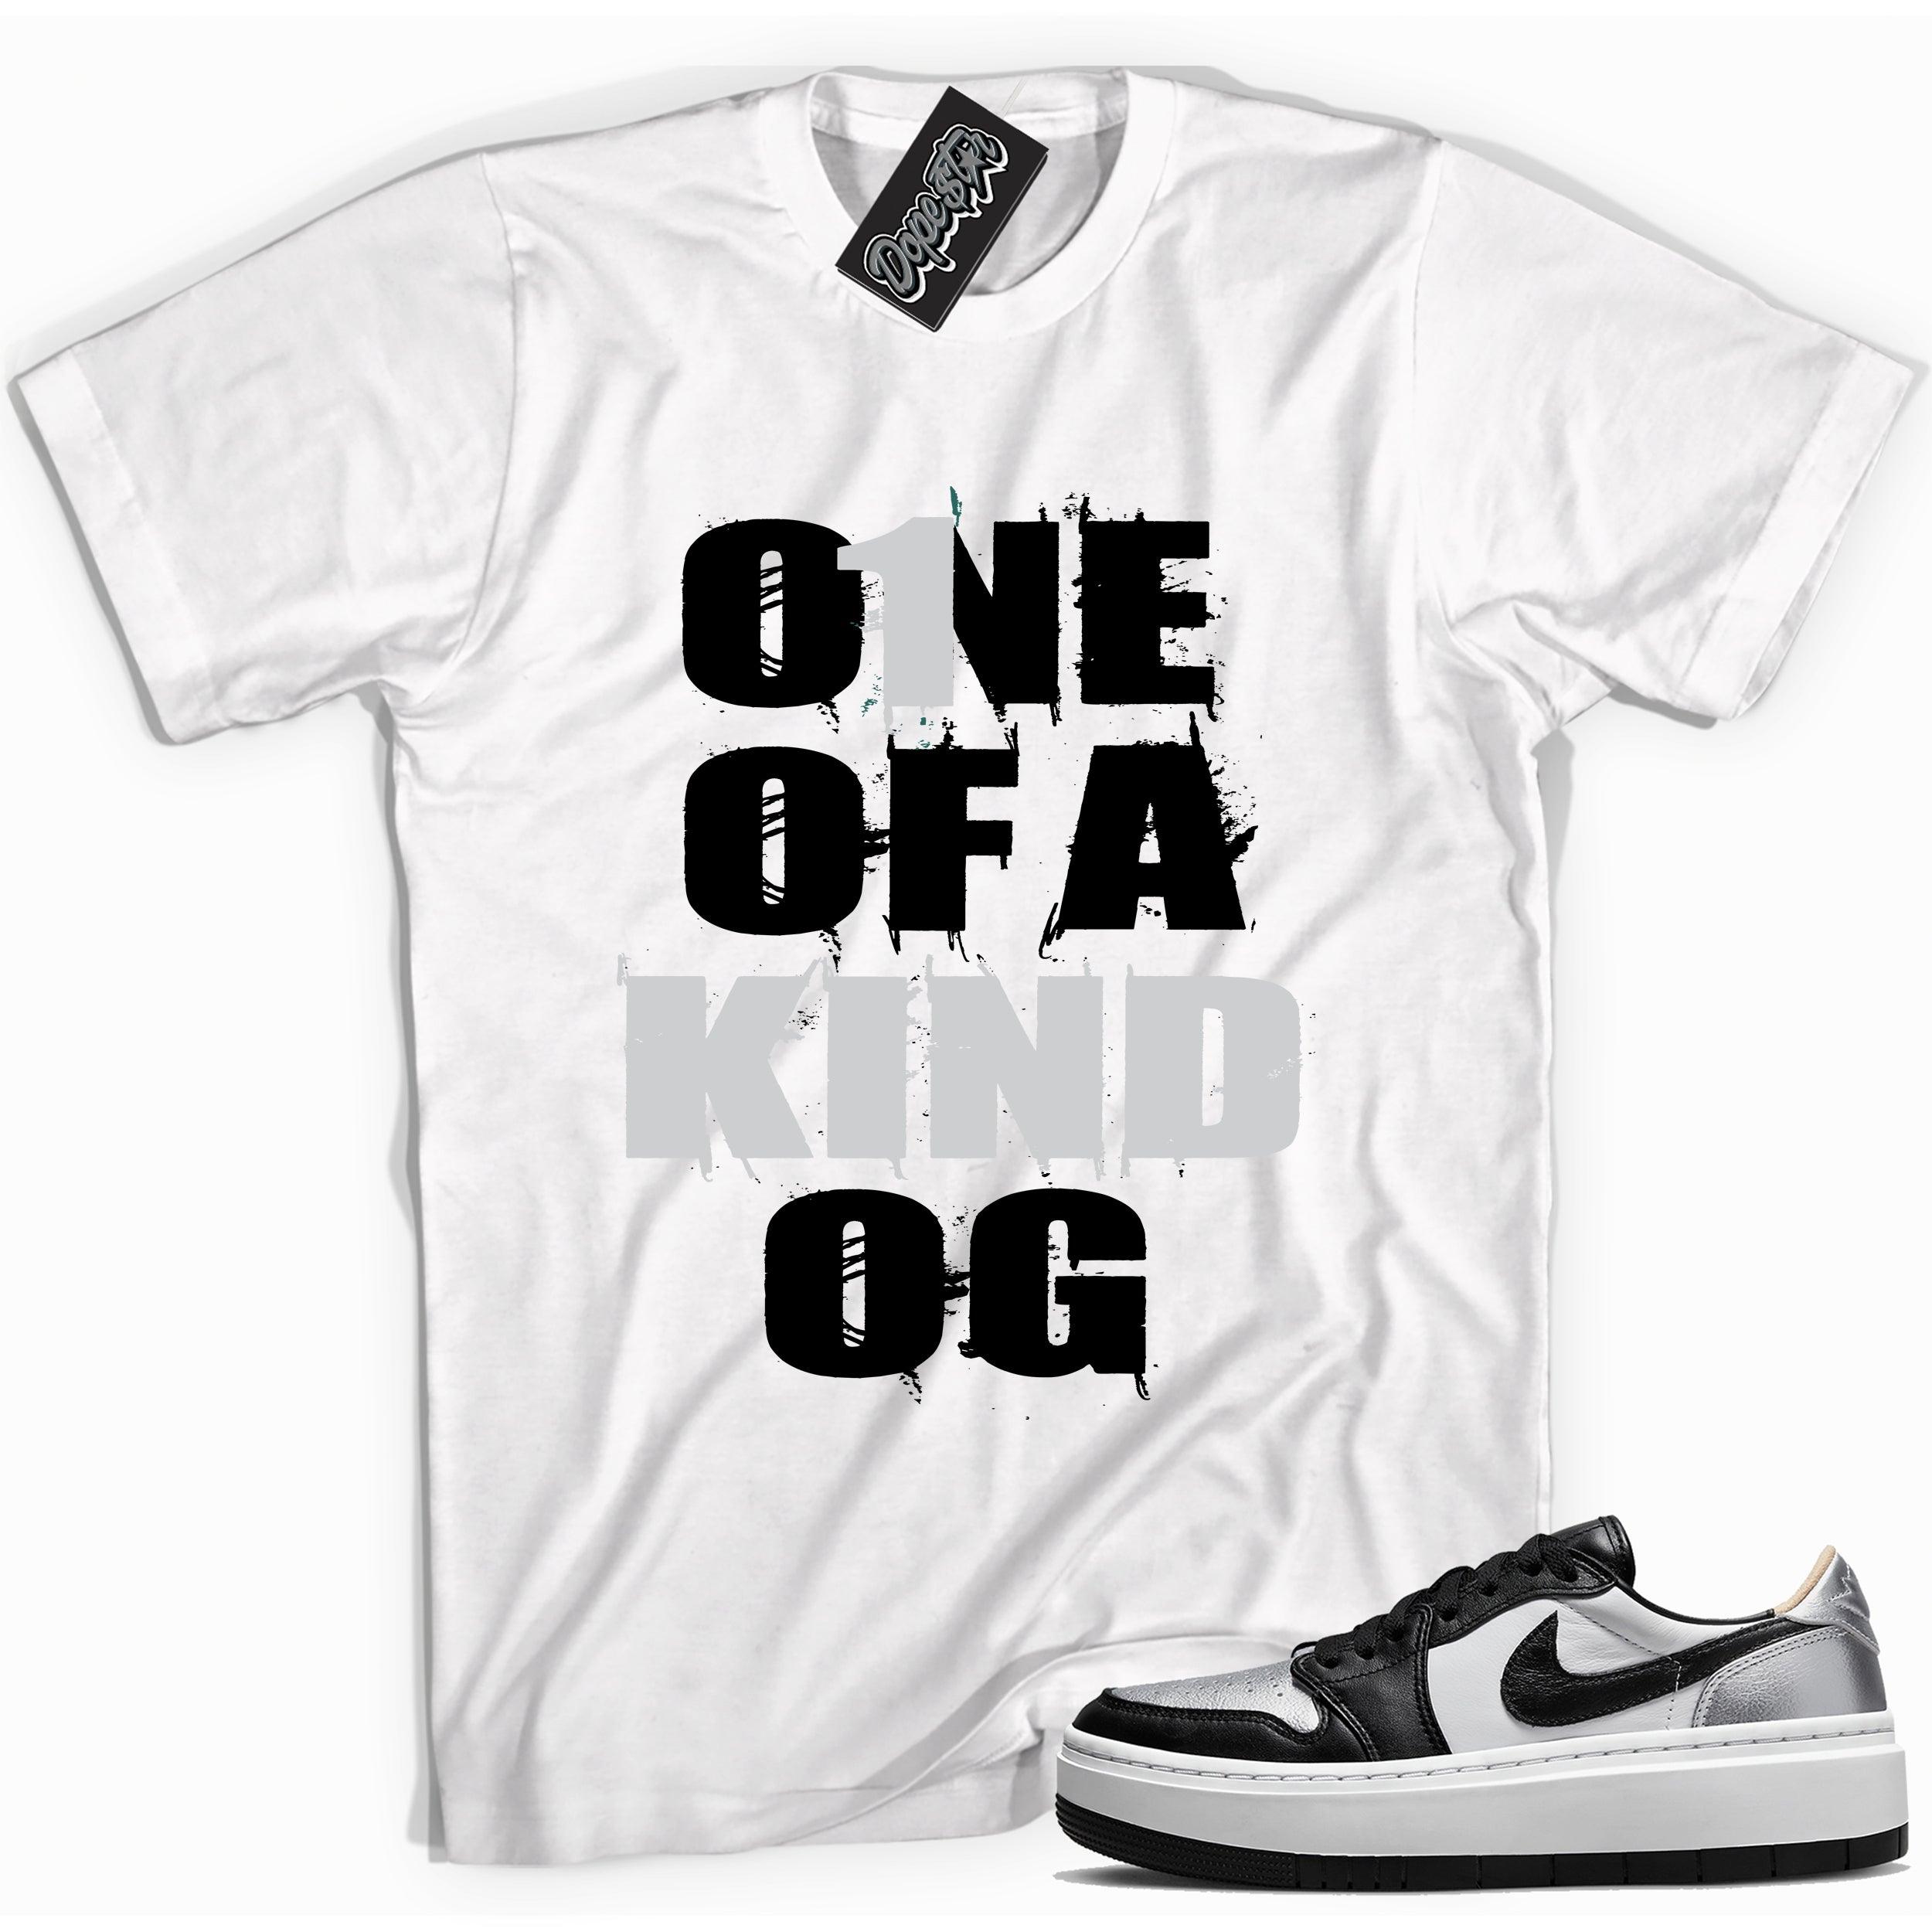 Cool white graphic tee with 'one of a kind' print, that perfectly matches Air Jordan 1 Elevate Low SE Silver Toe sneakers.